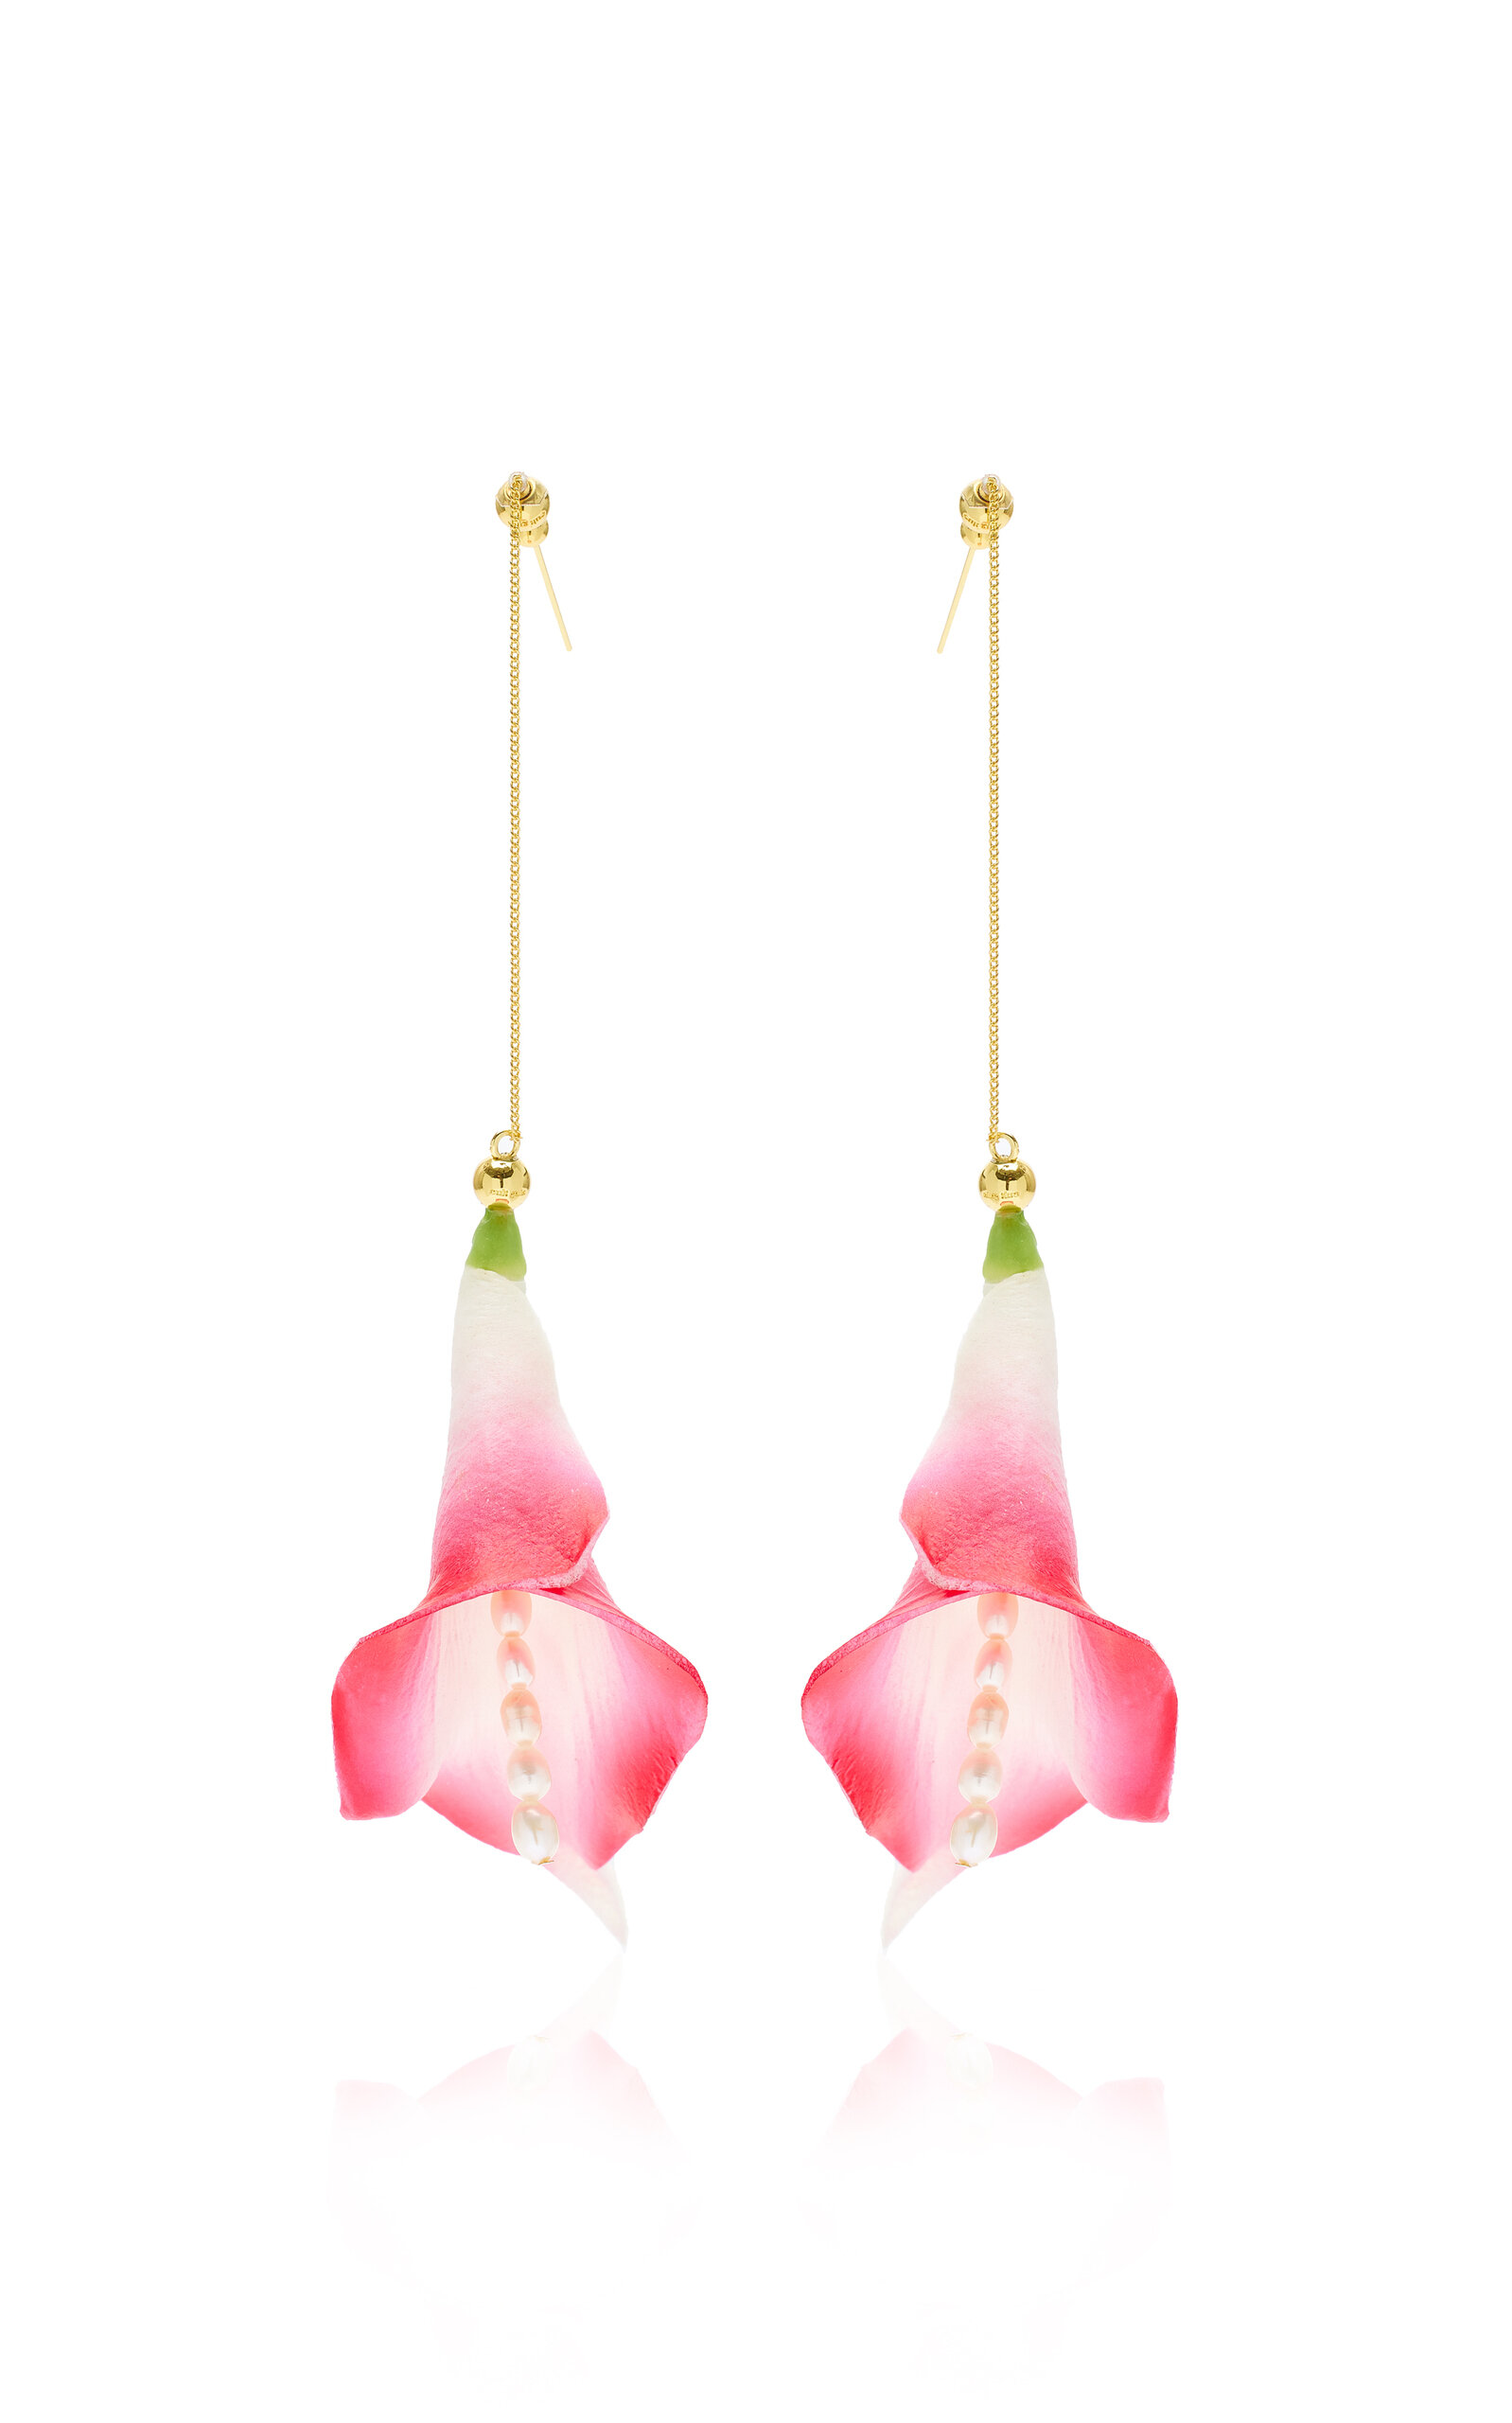 Cult Gaia - Women's Calla Pearl-Detailed Faux Floral Earring - Pink - OS - Moda Operandi - Gifts For Her